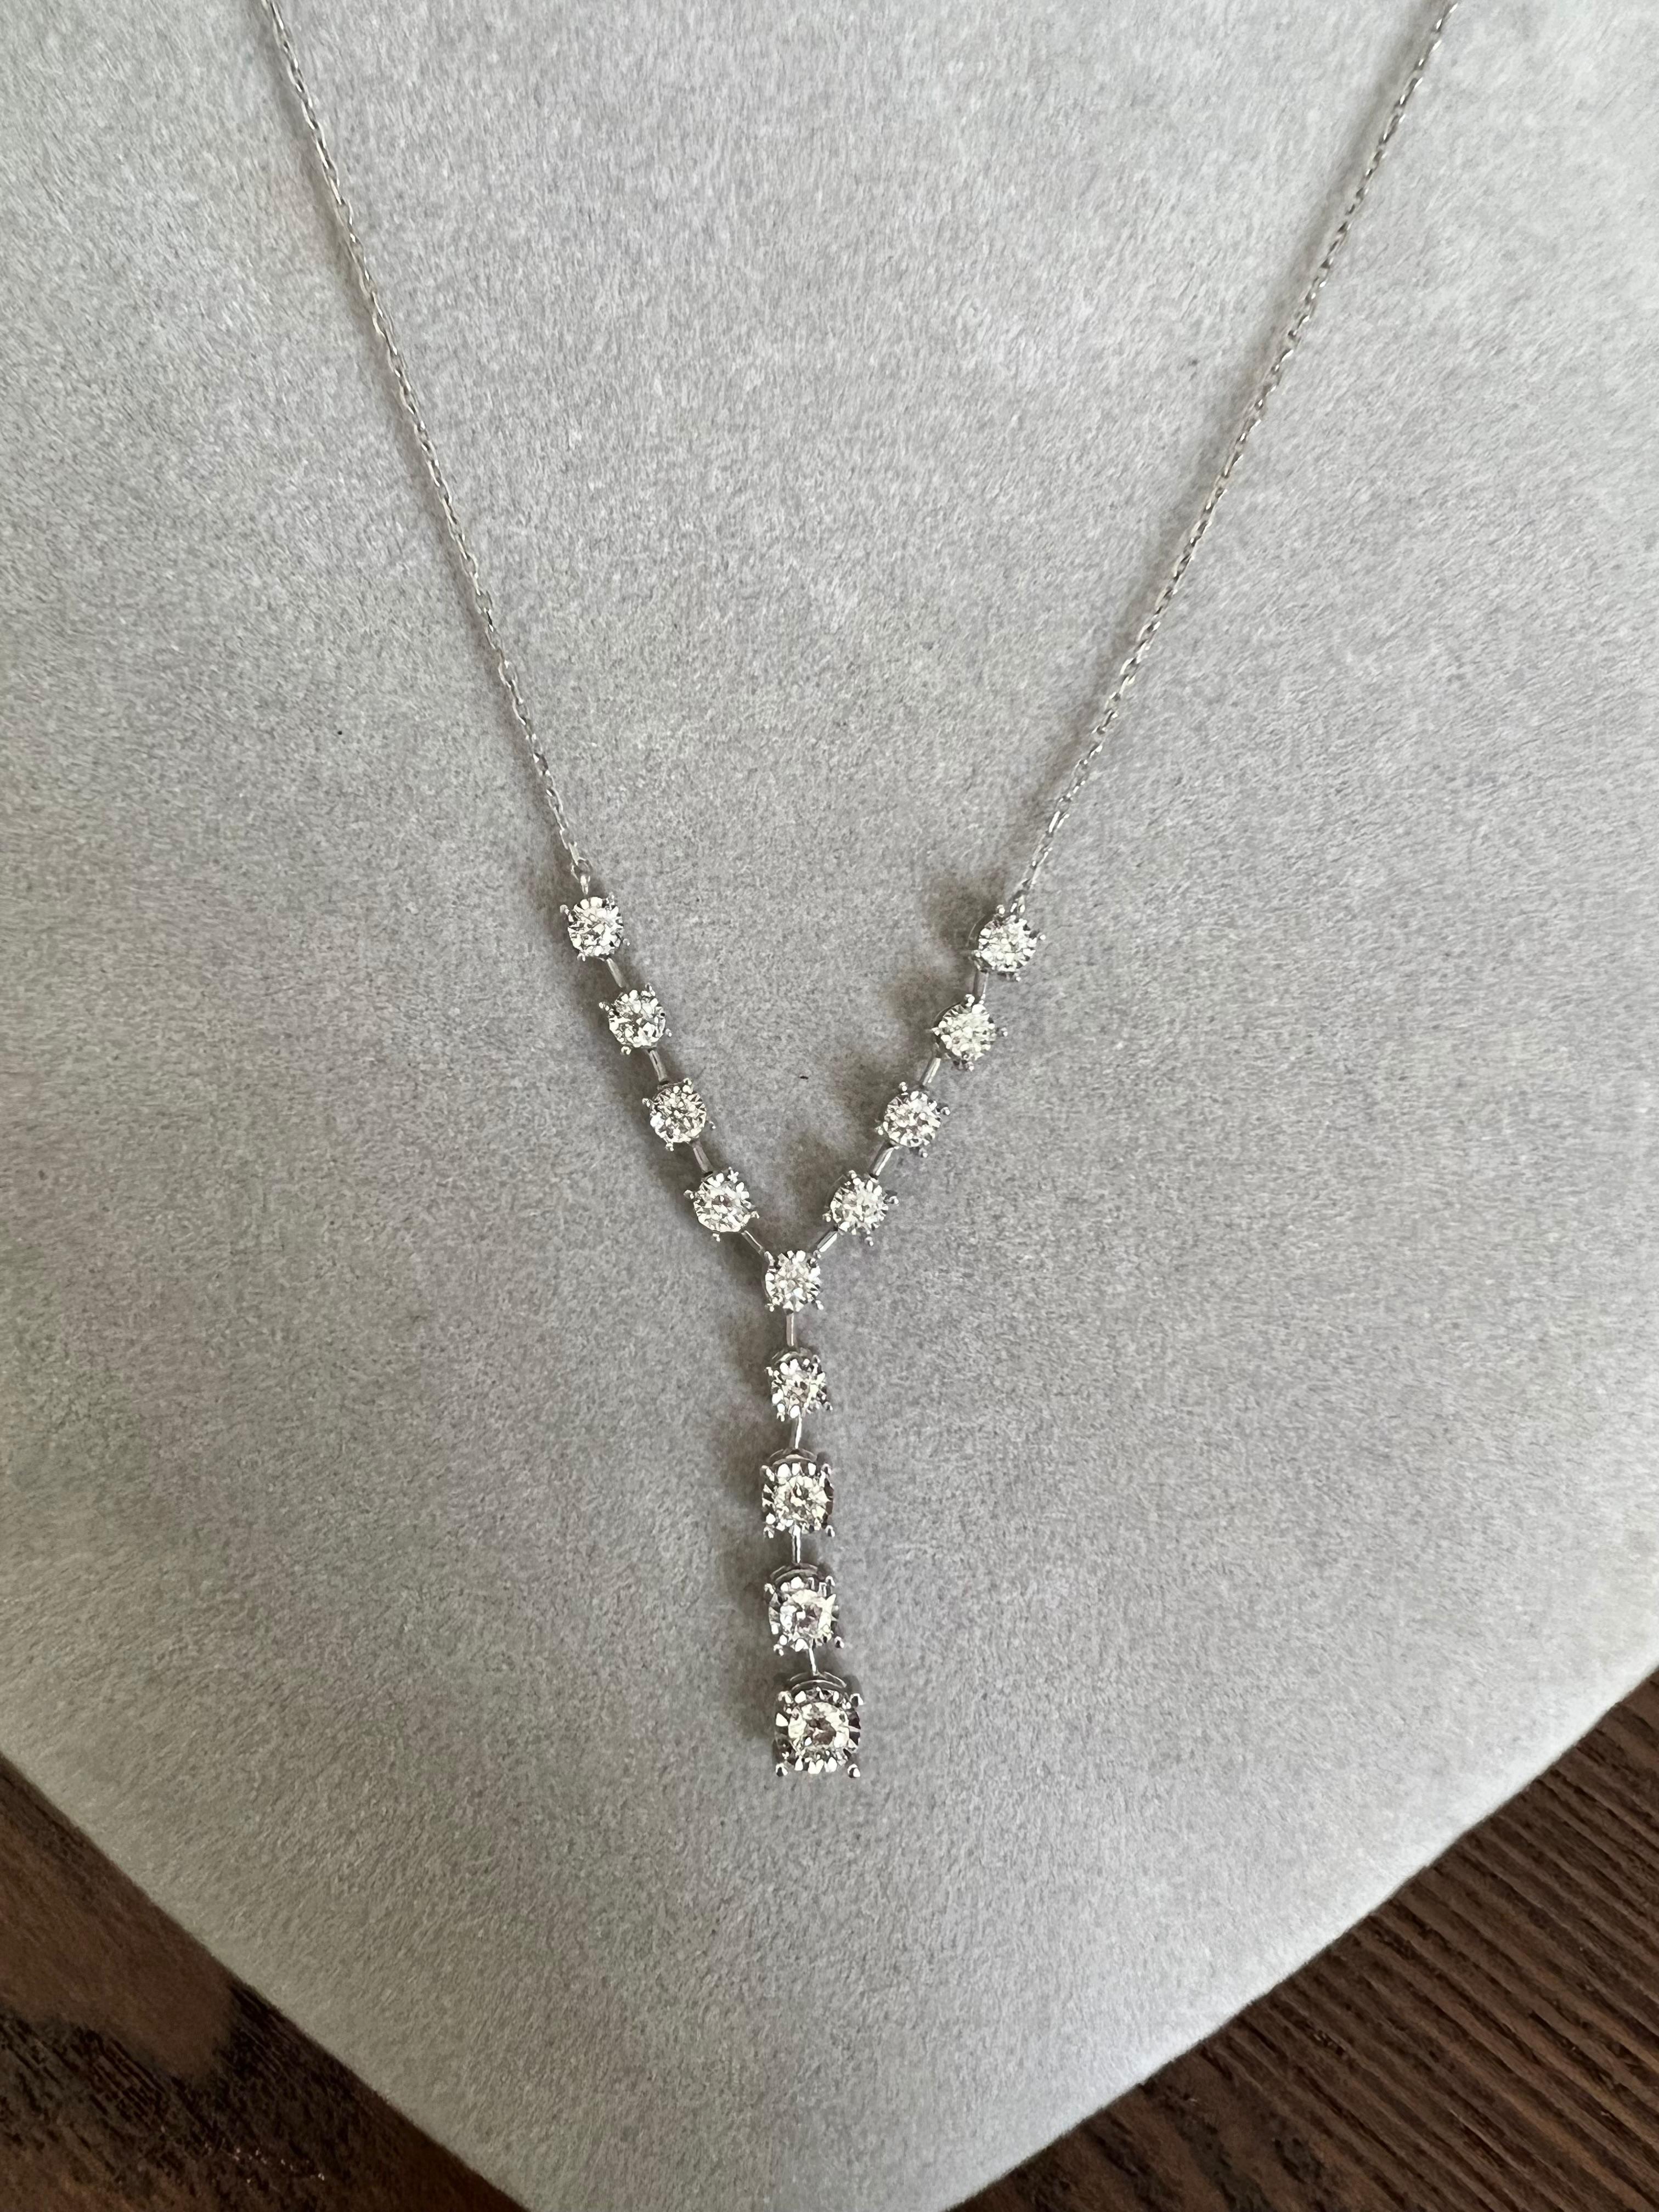 This chain necklace has 13 Natural Round Cut Diamonds that weigh 0.75 carats. The clarity and color of the necklace are SI-F.

The approximate weight of this necklace is 3.5 grams. 

The necklace is 16 inches long. 